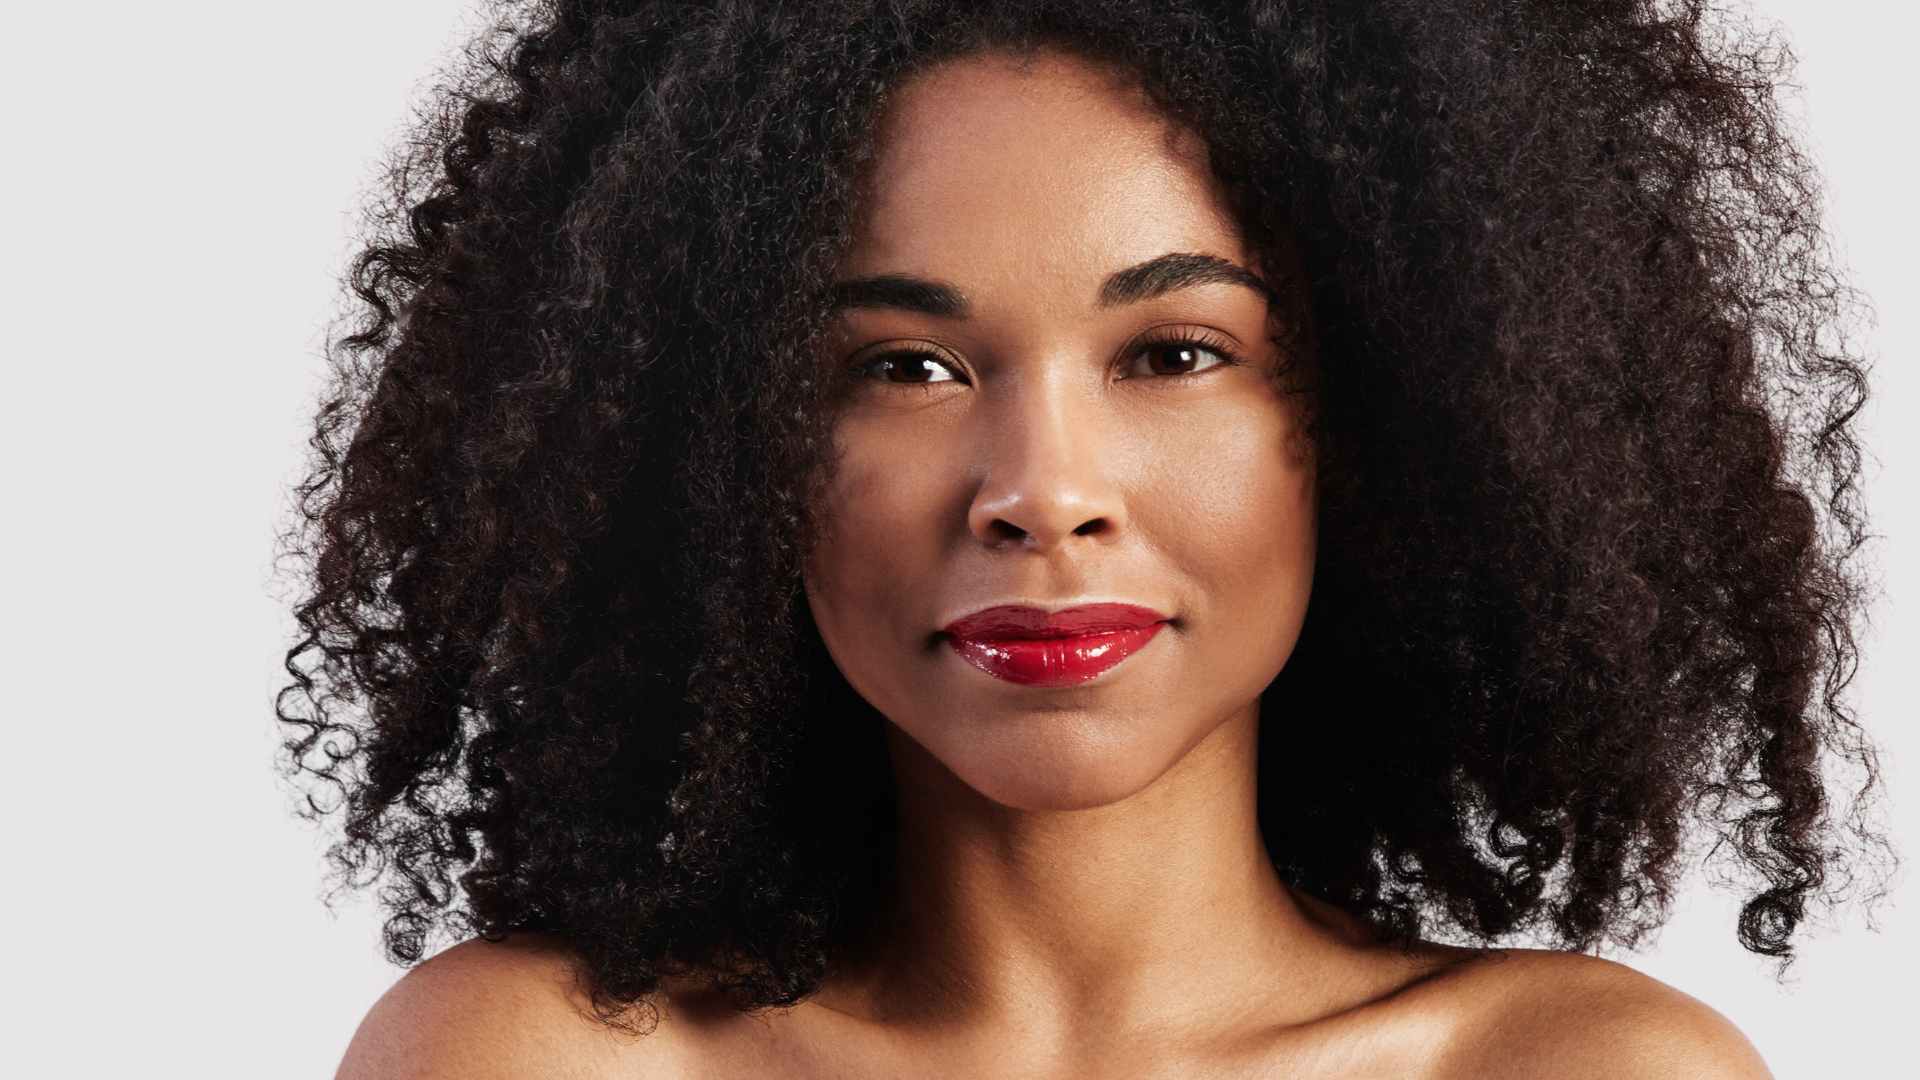 female with red lipstick smiling with shiny black afro hair